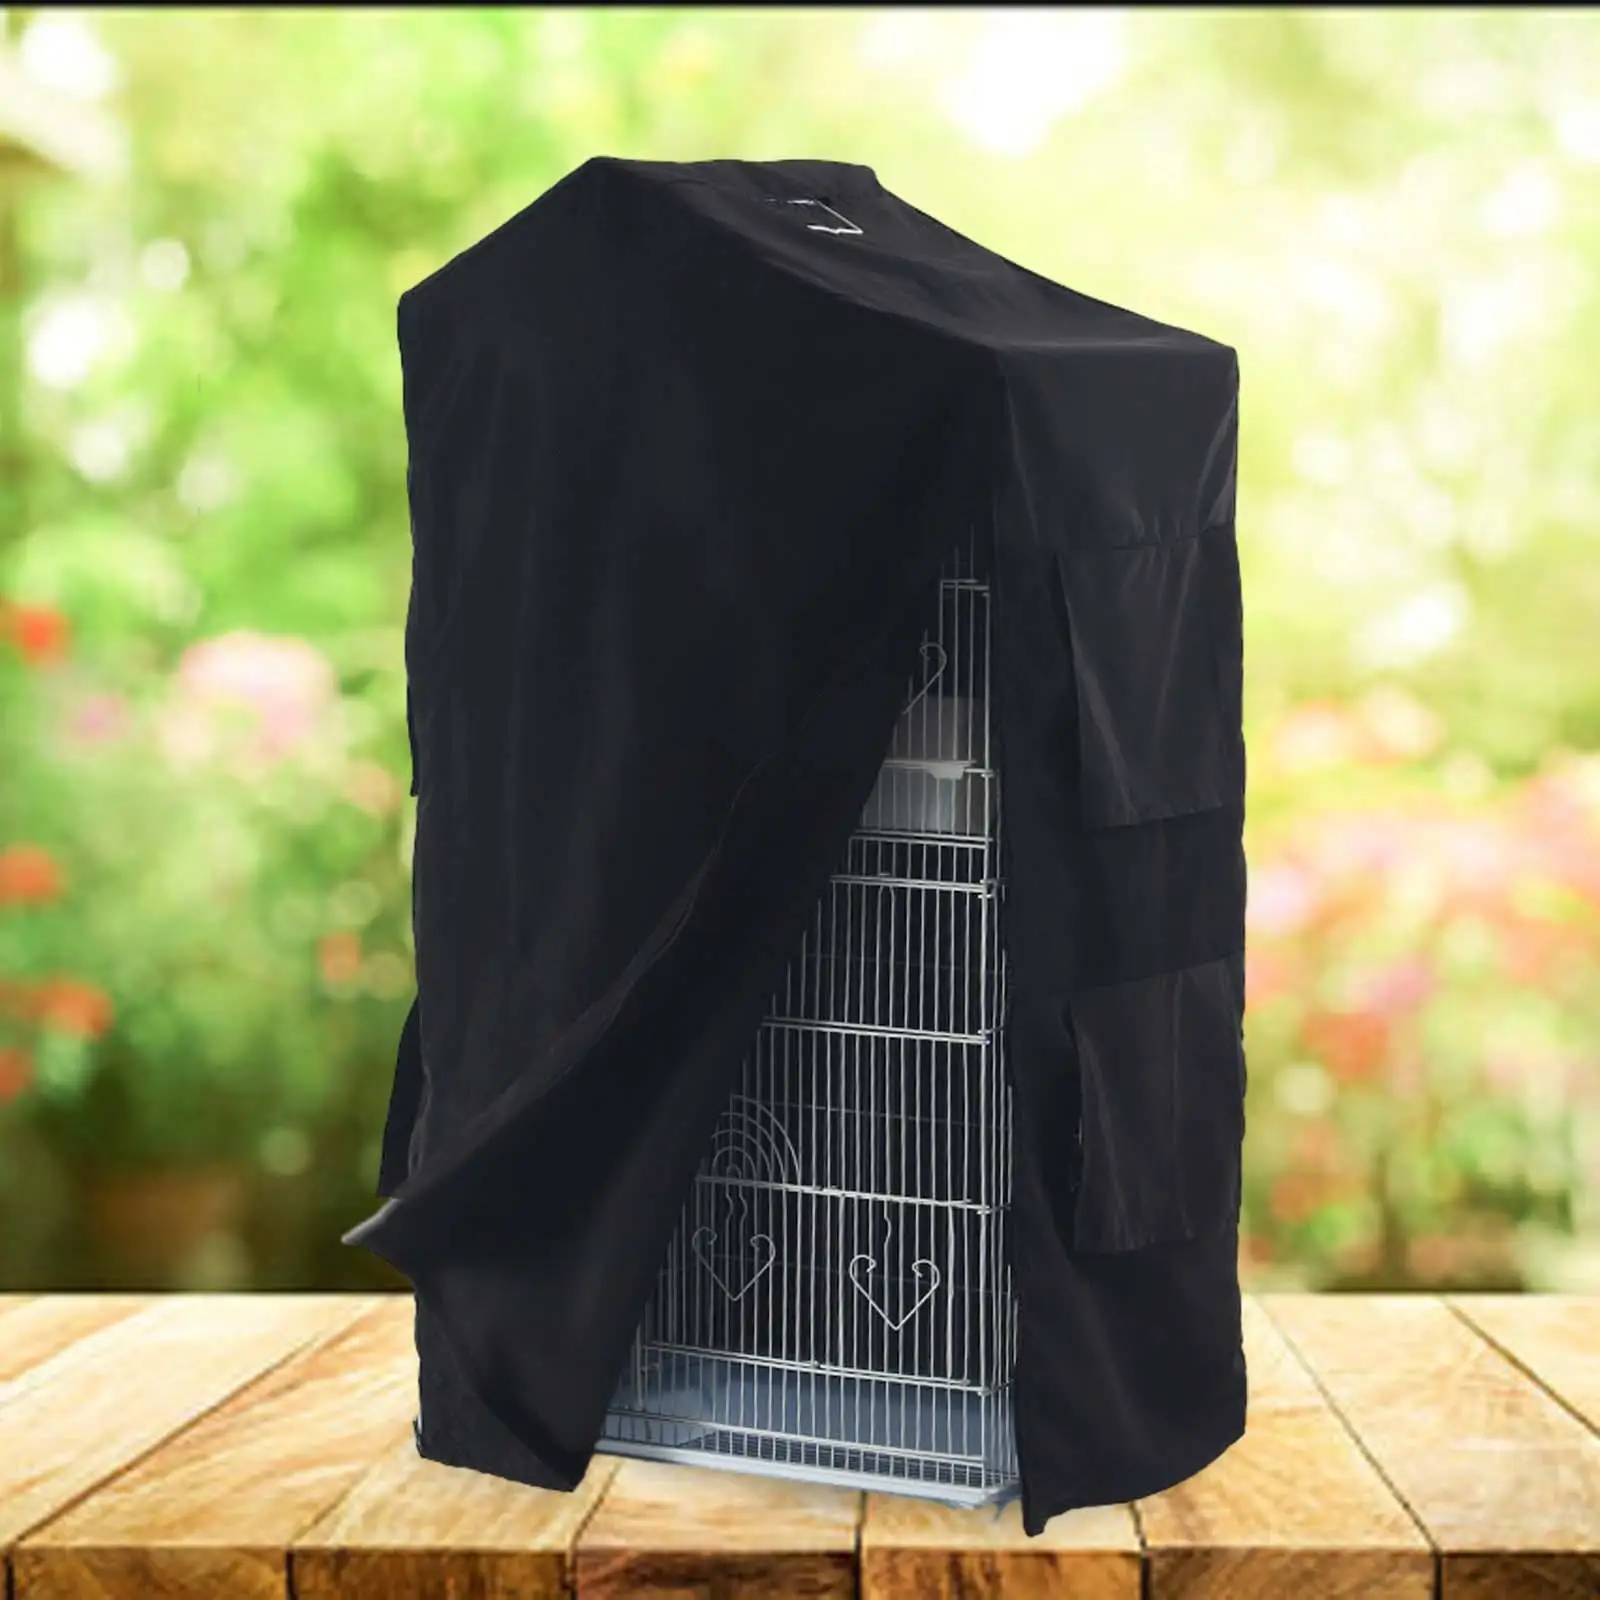 Bird Cage Cover Waterproof Rainproof Shade Cloth Birdcage Cover Dustproof for Parakeets Macaw Lovebirds Budgies Accessories